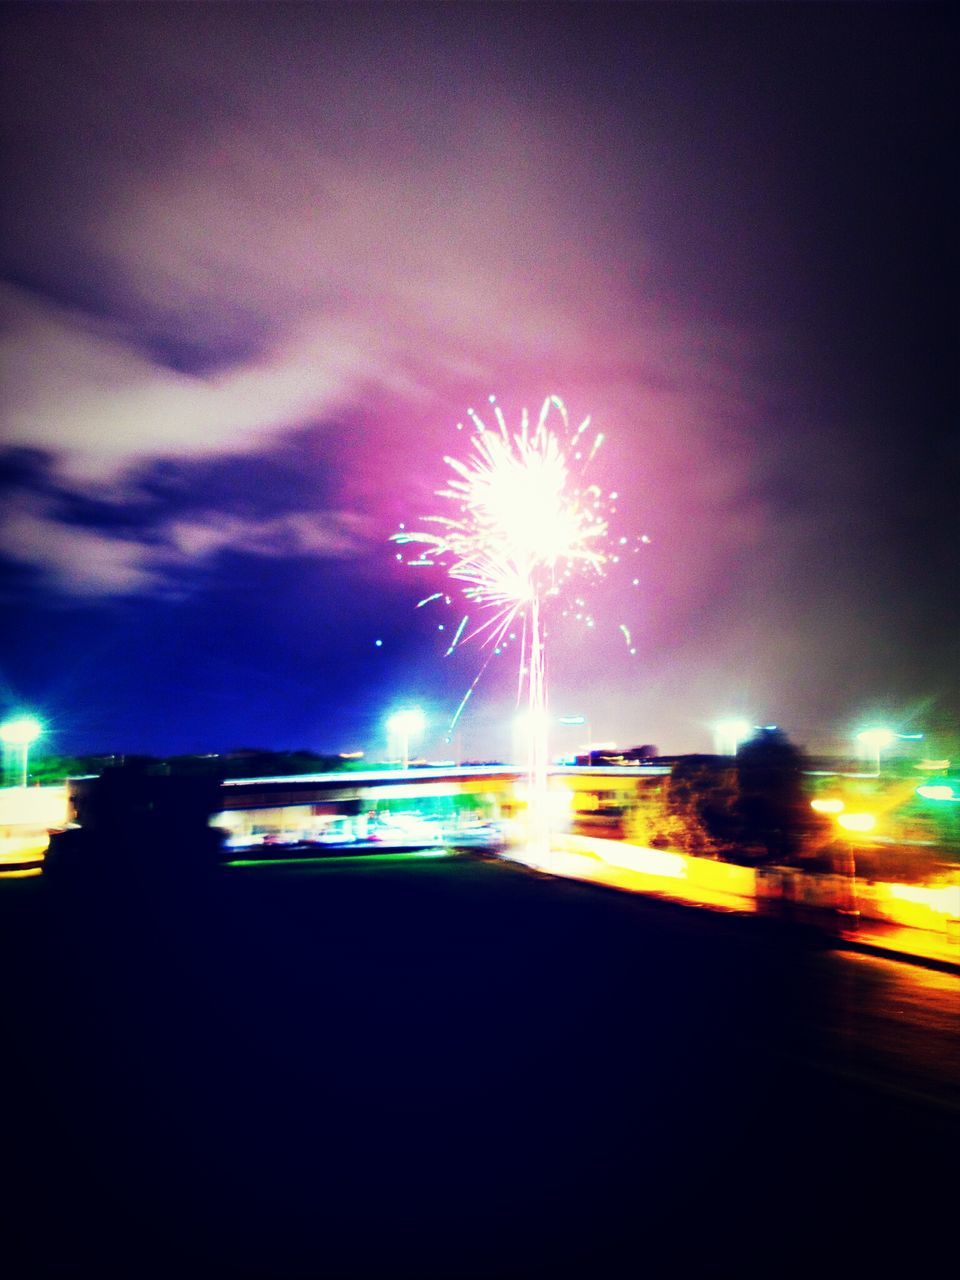 night, illuminated, firework display, glowing, long exposure, exploding, sky, motion, low angle view, celebration, firework - man made object, firework, building exterior, blurred motion, arts culture and entertainment, multi colored, built structure, light - natural phenomenon, architecture, sparks